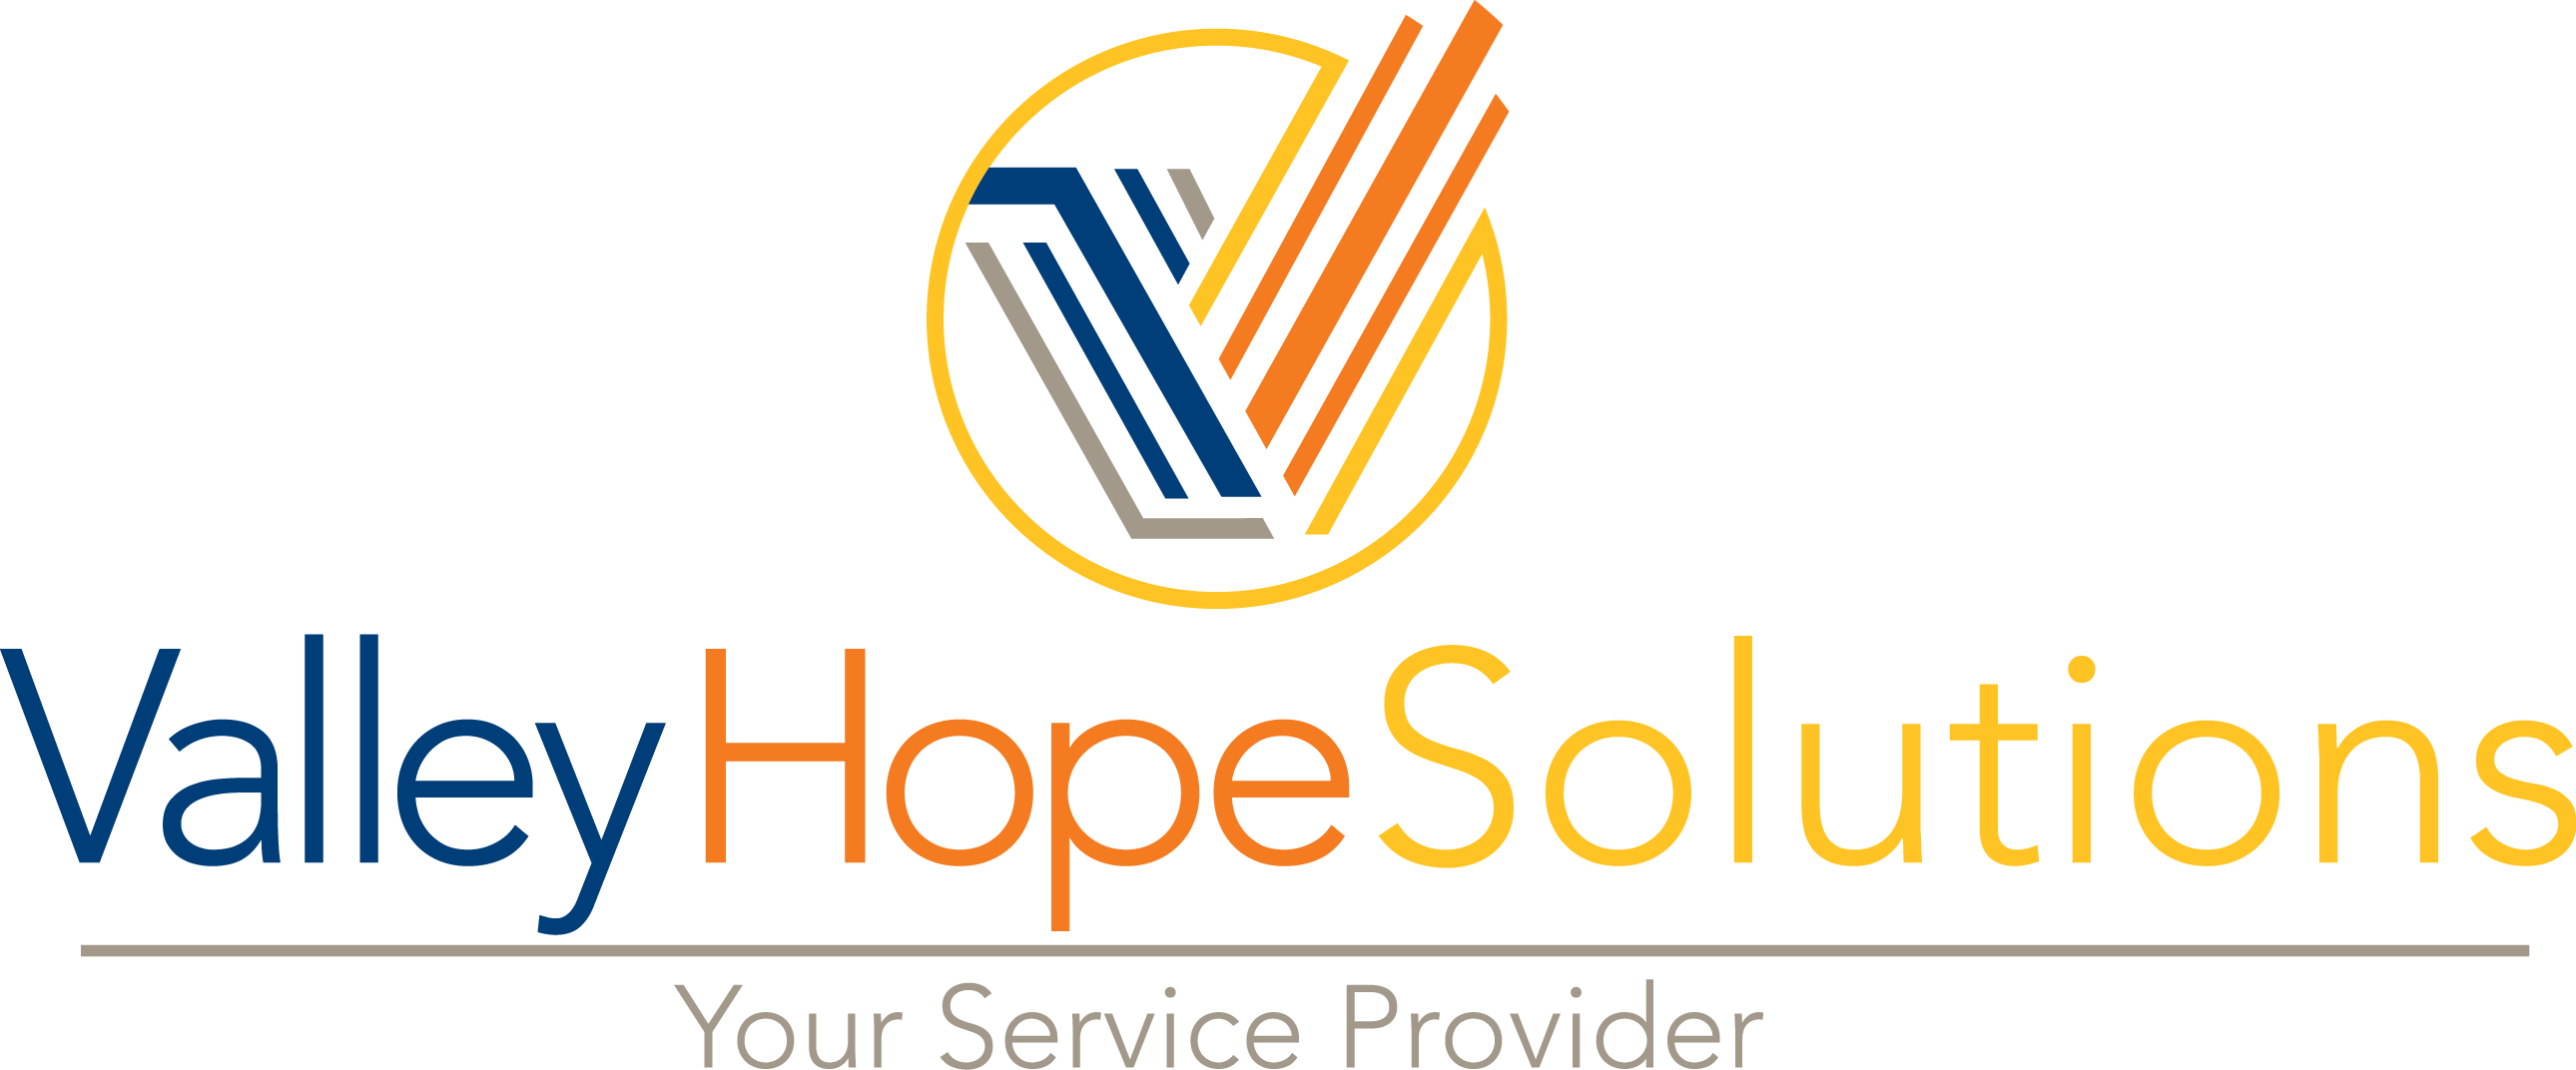 Valley Hope Solutions